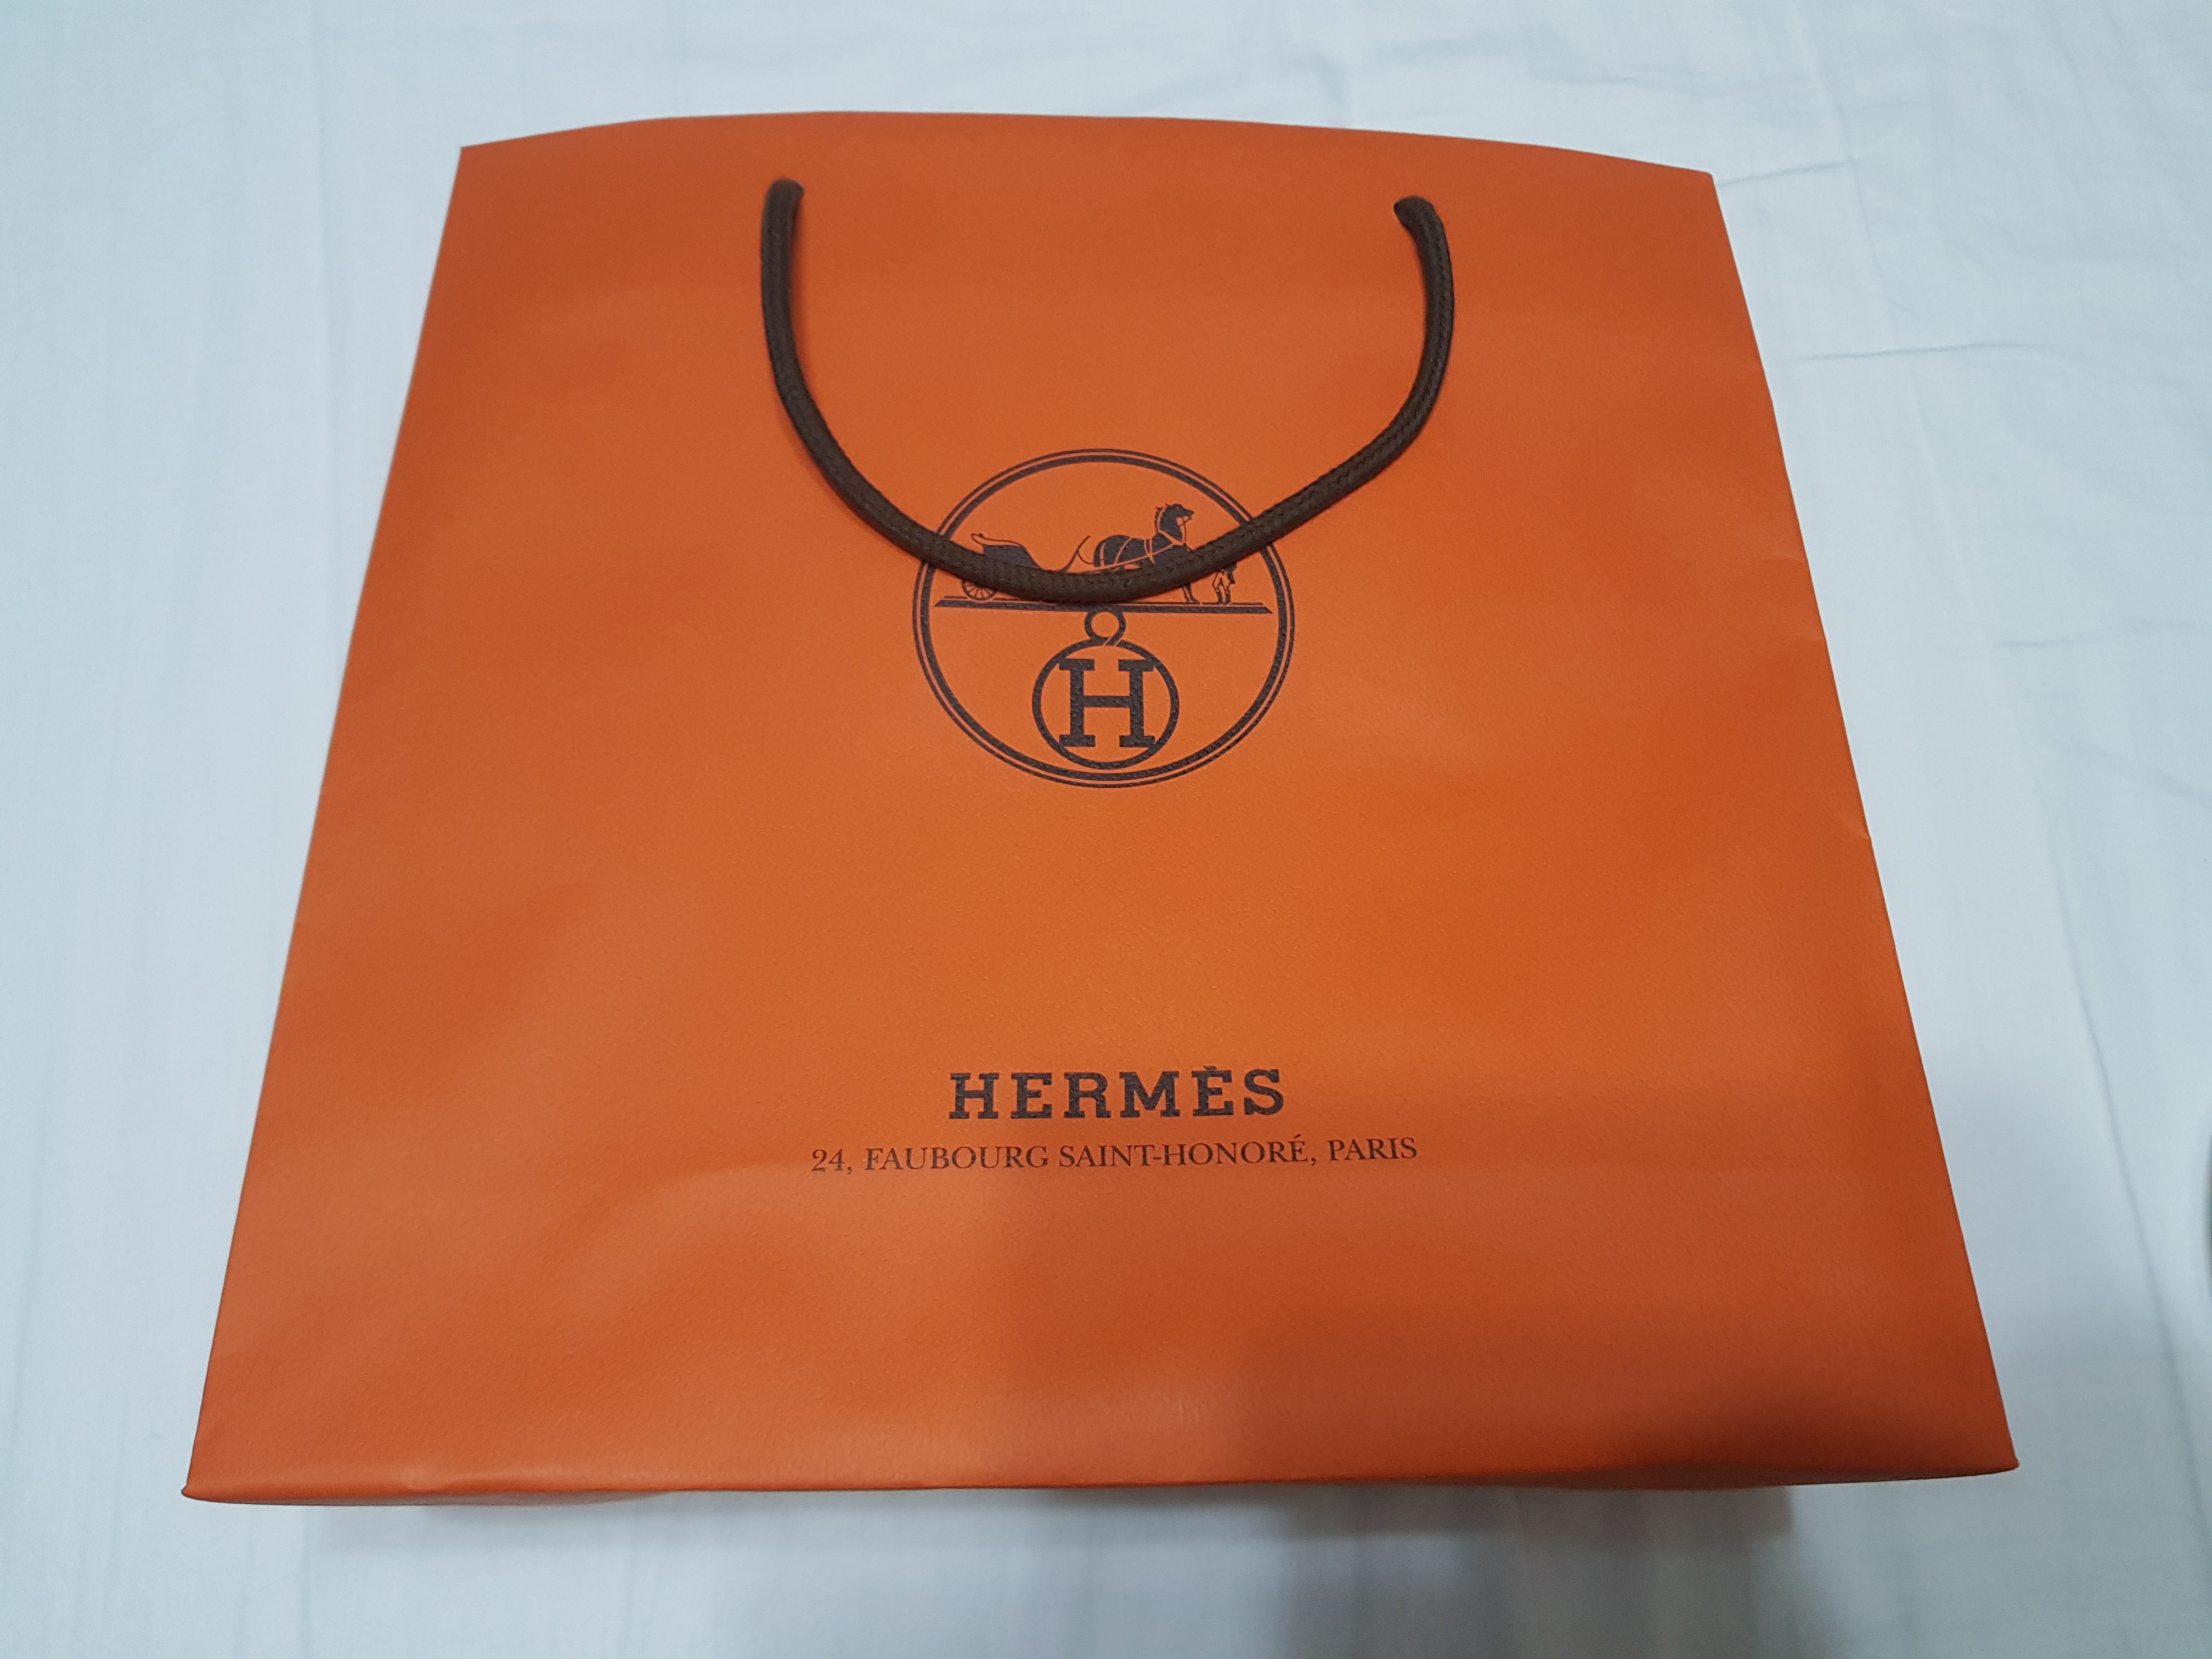 Hermes Paper Bag For Sale year 2020 